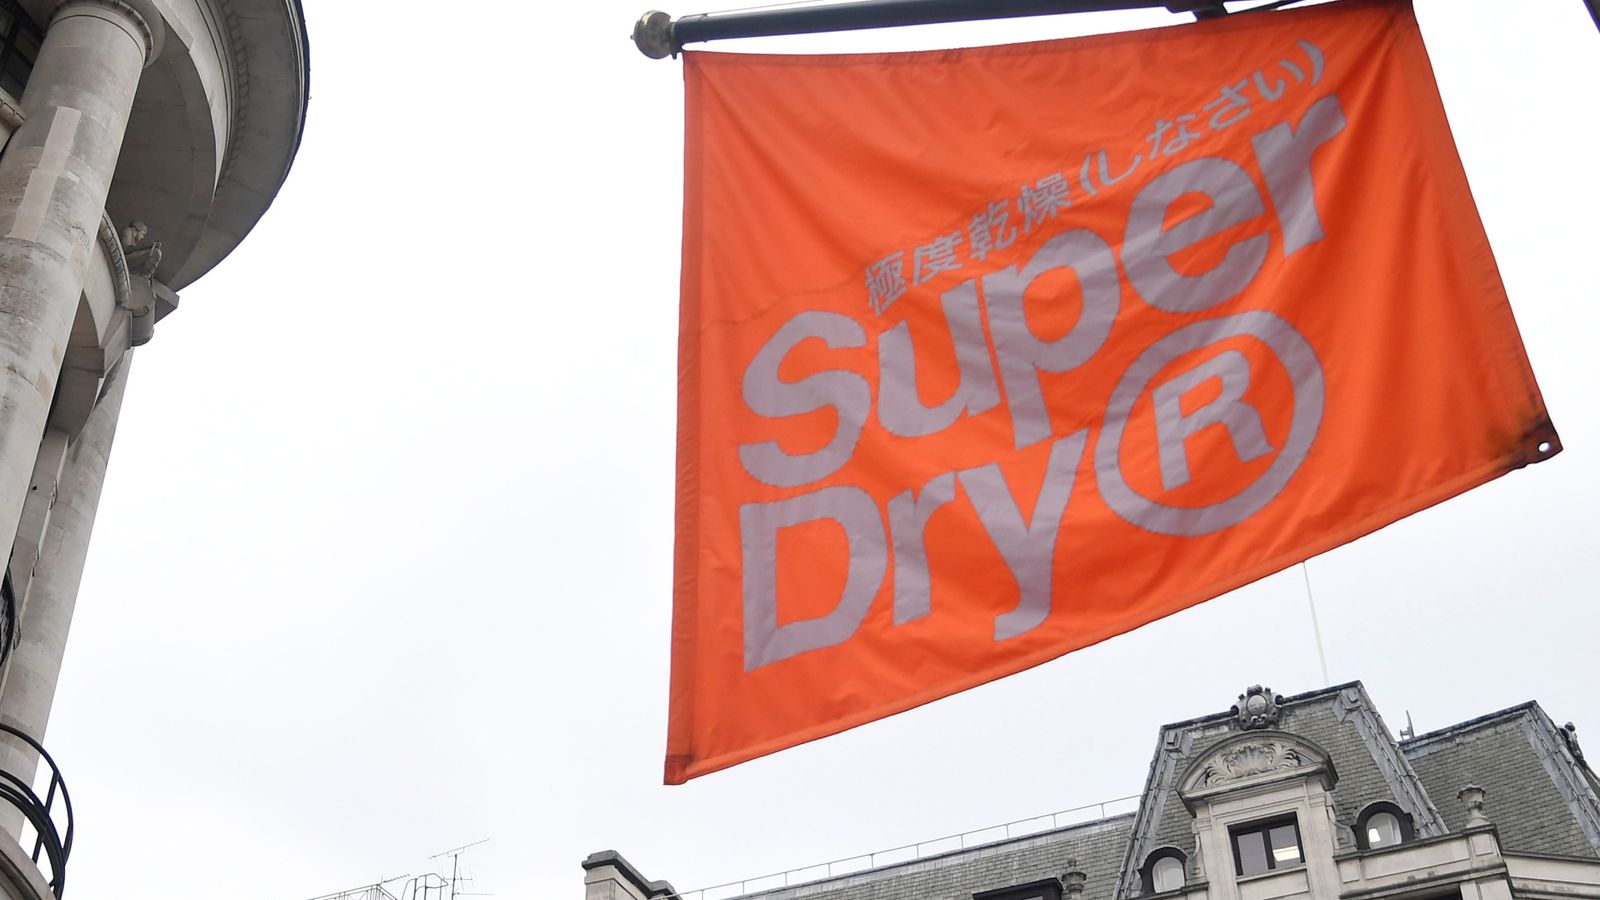 Superdry in advanced talks to fashion £15m cash call